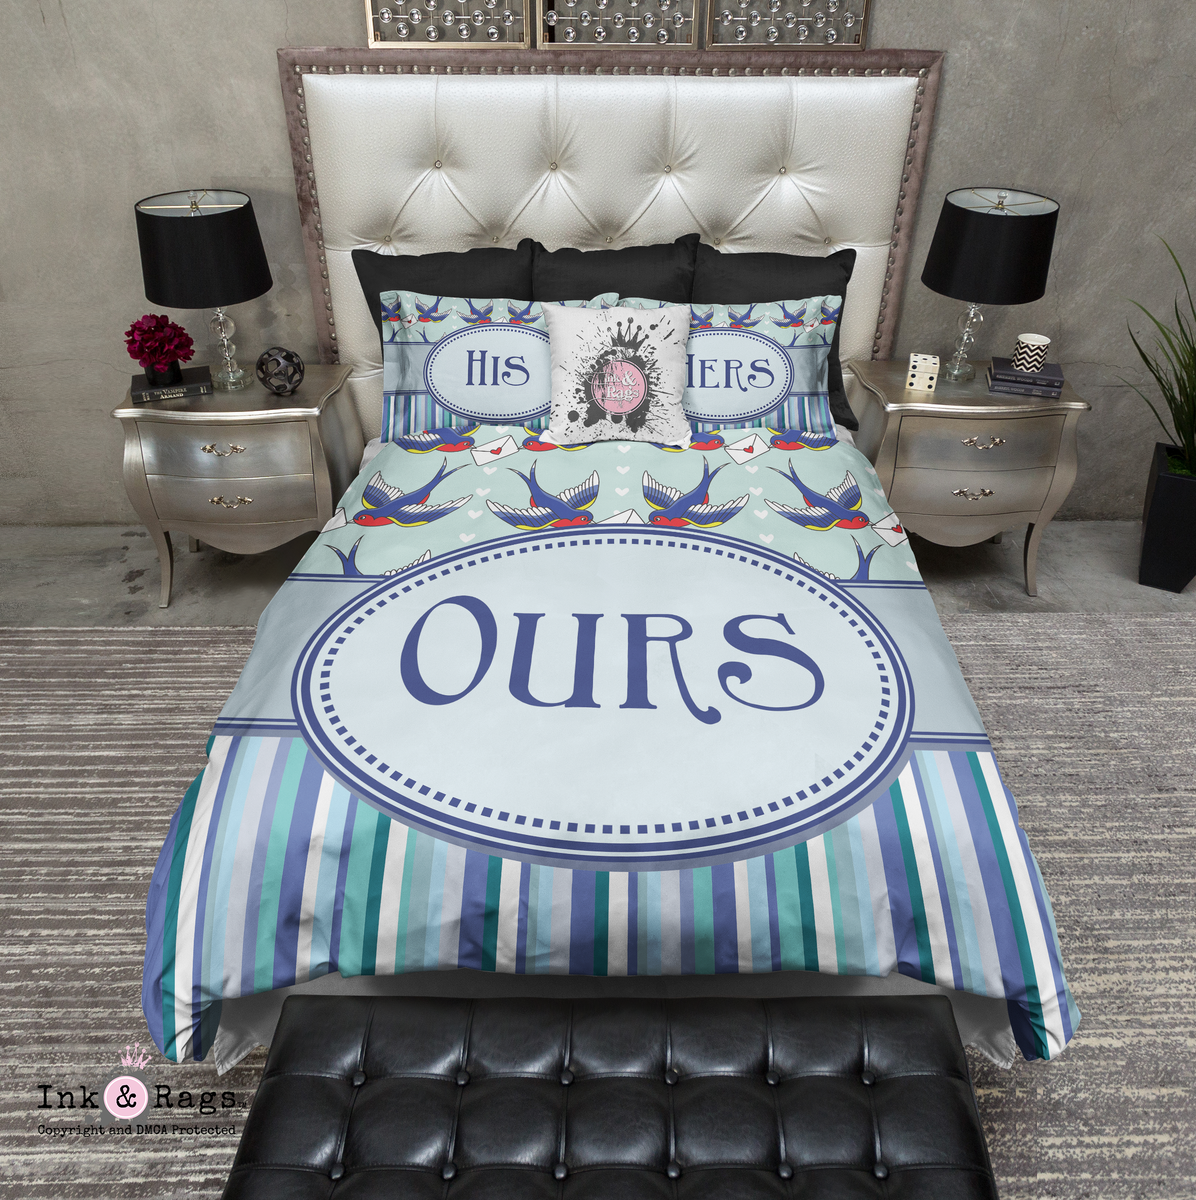 His Hers Ours And Lgbt Rockabilly Duvet Bedding Sets Ink And Rags